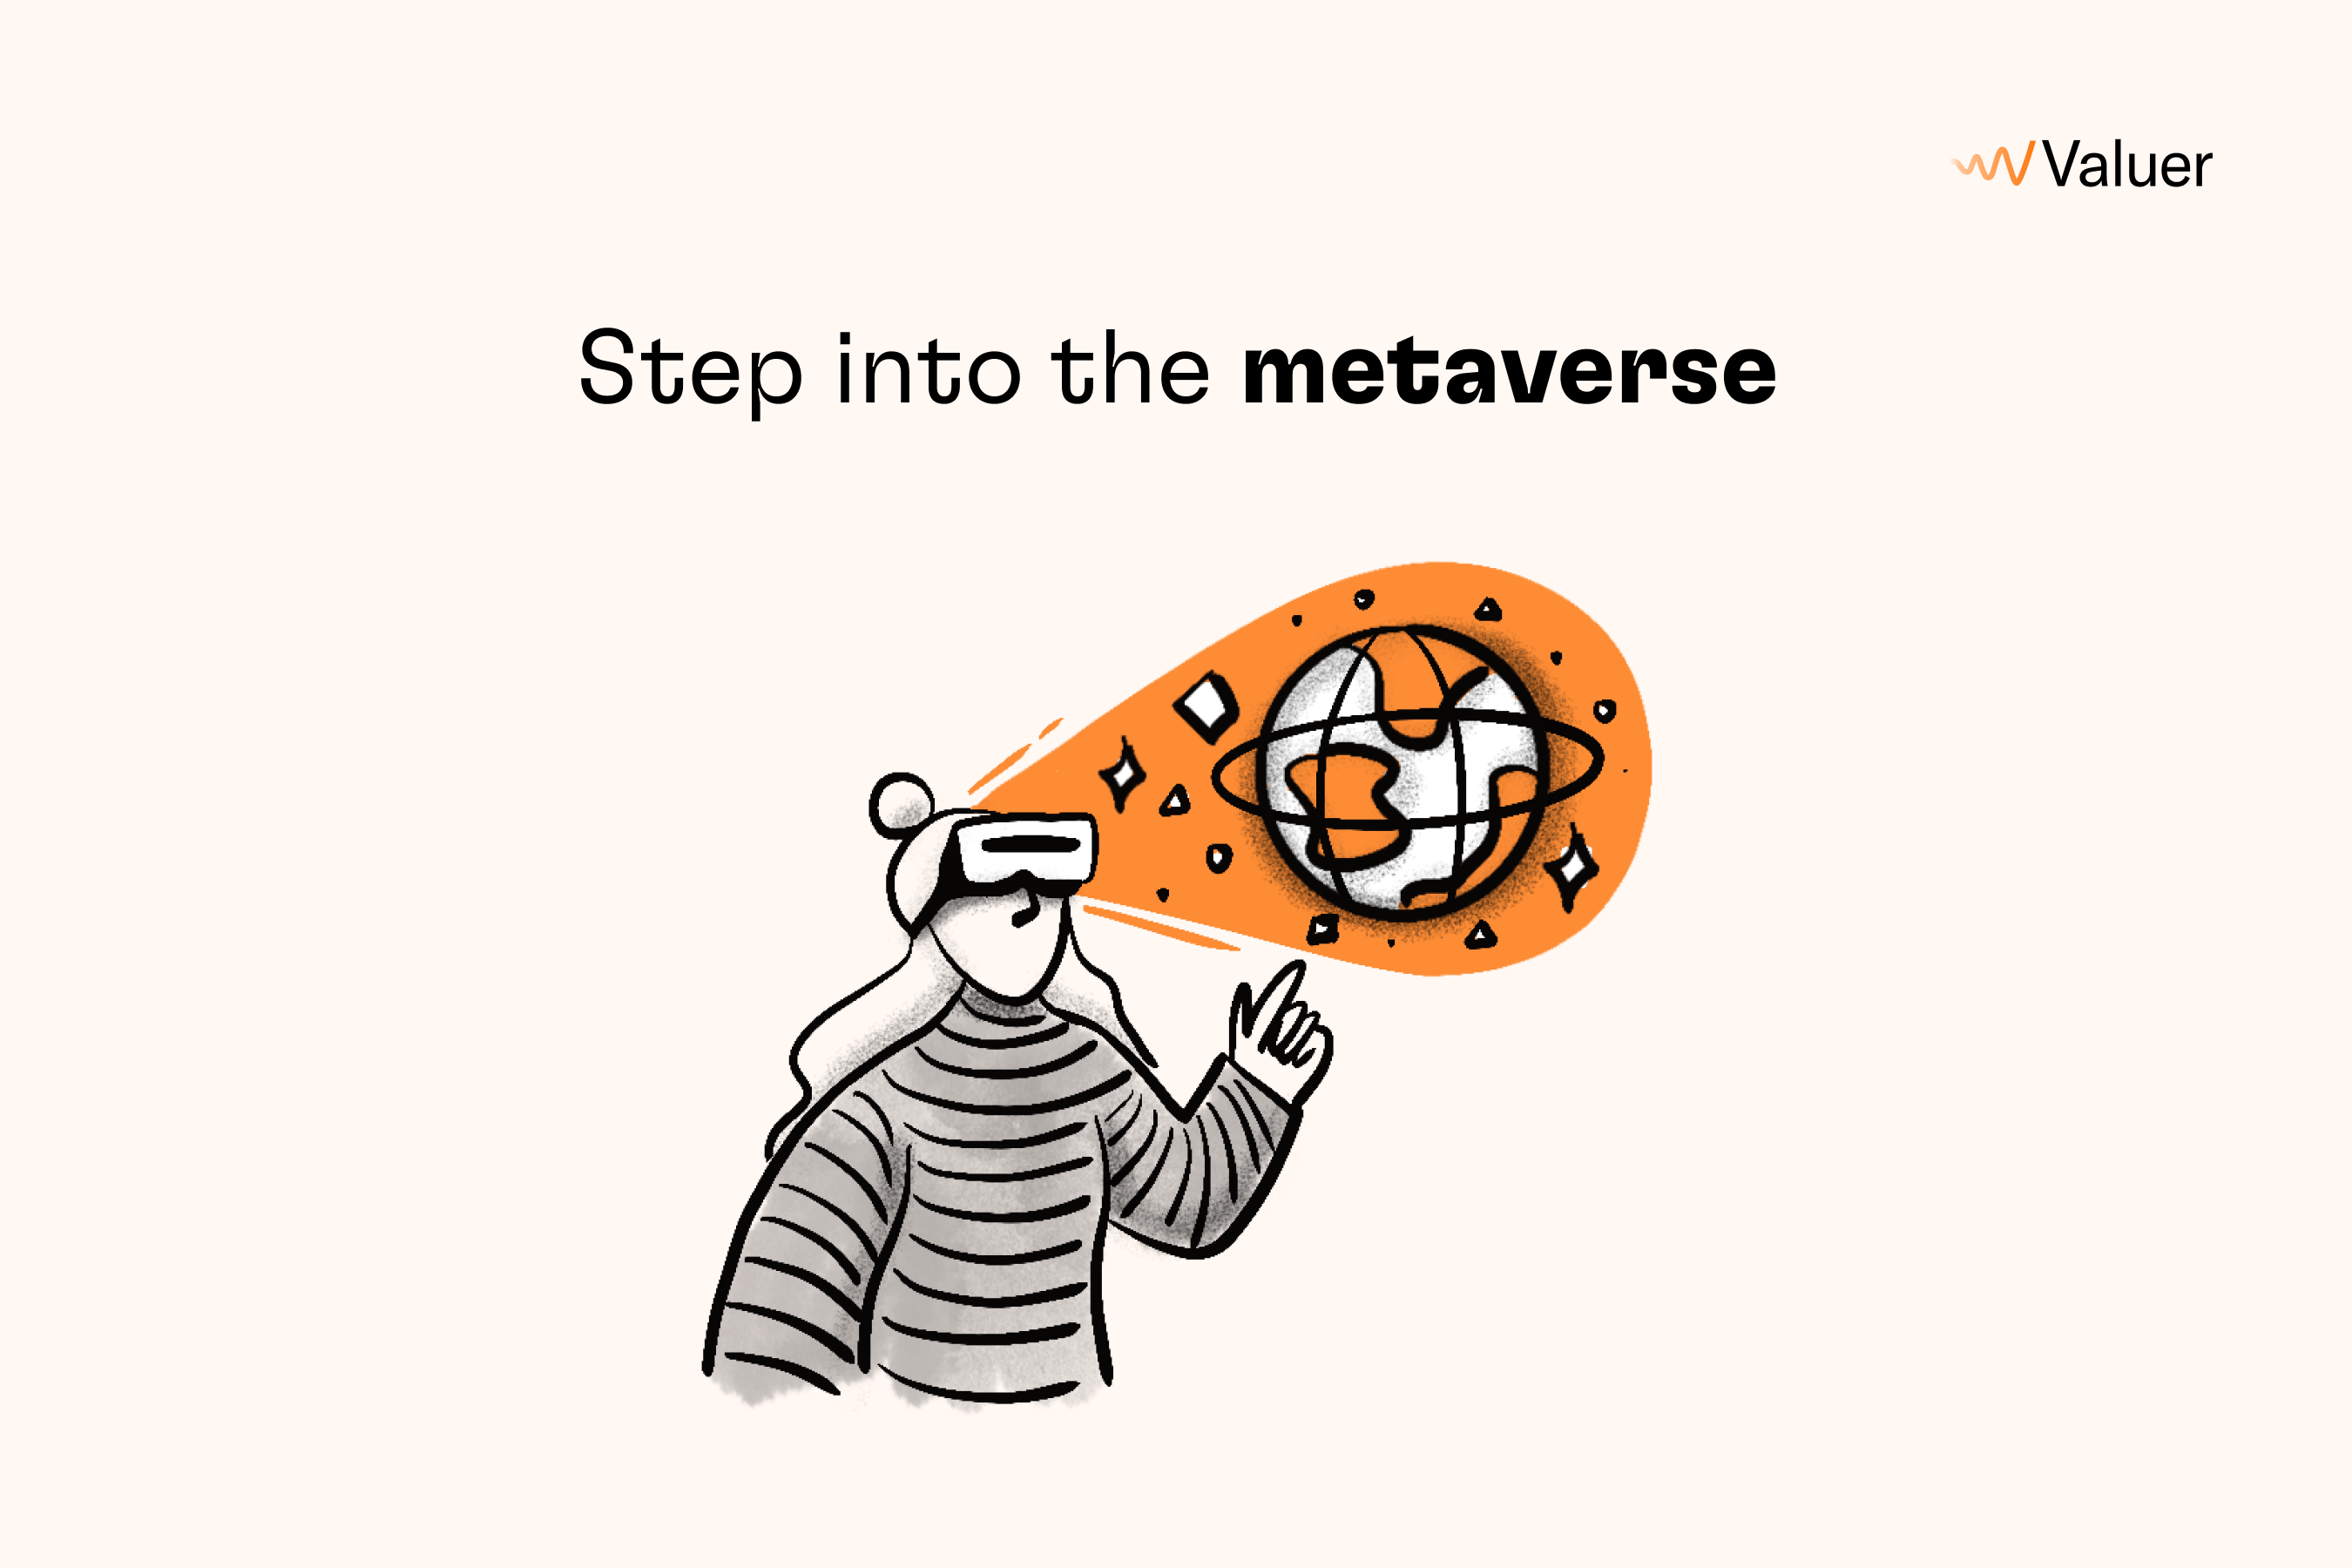 Step into the metaverse